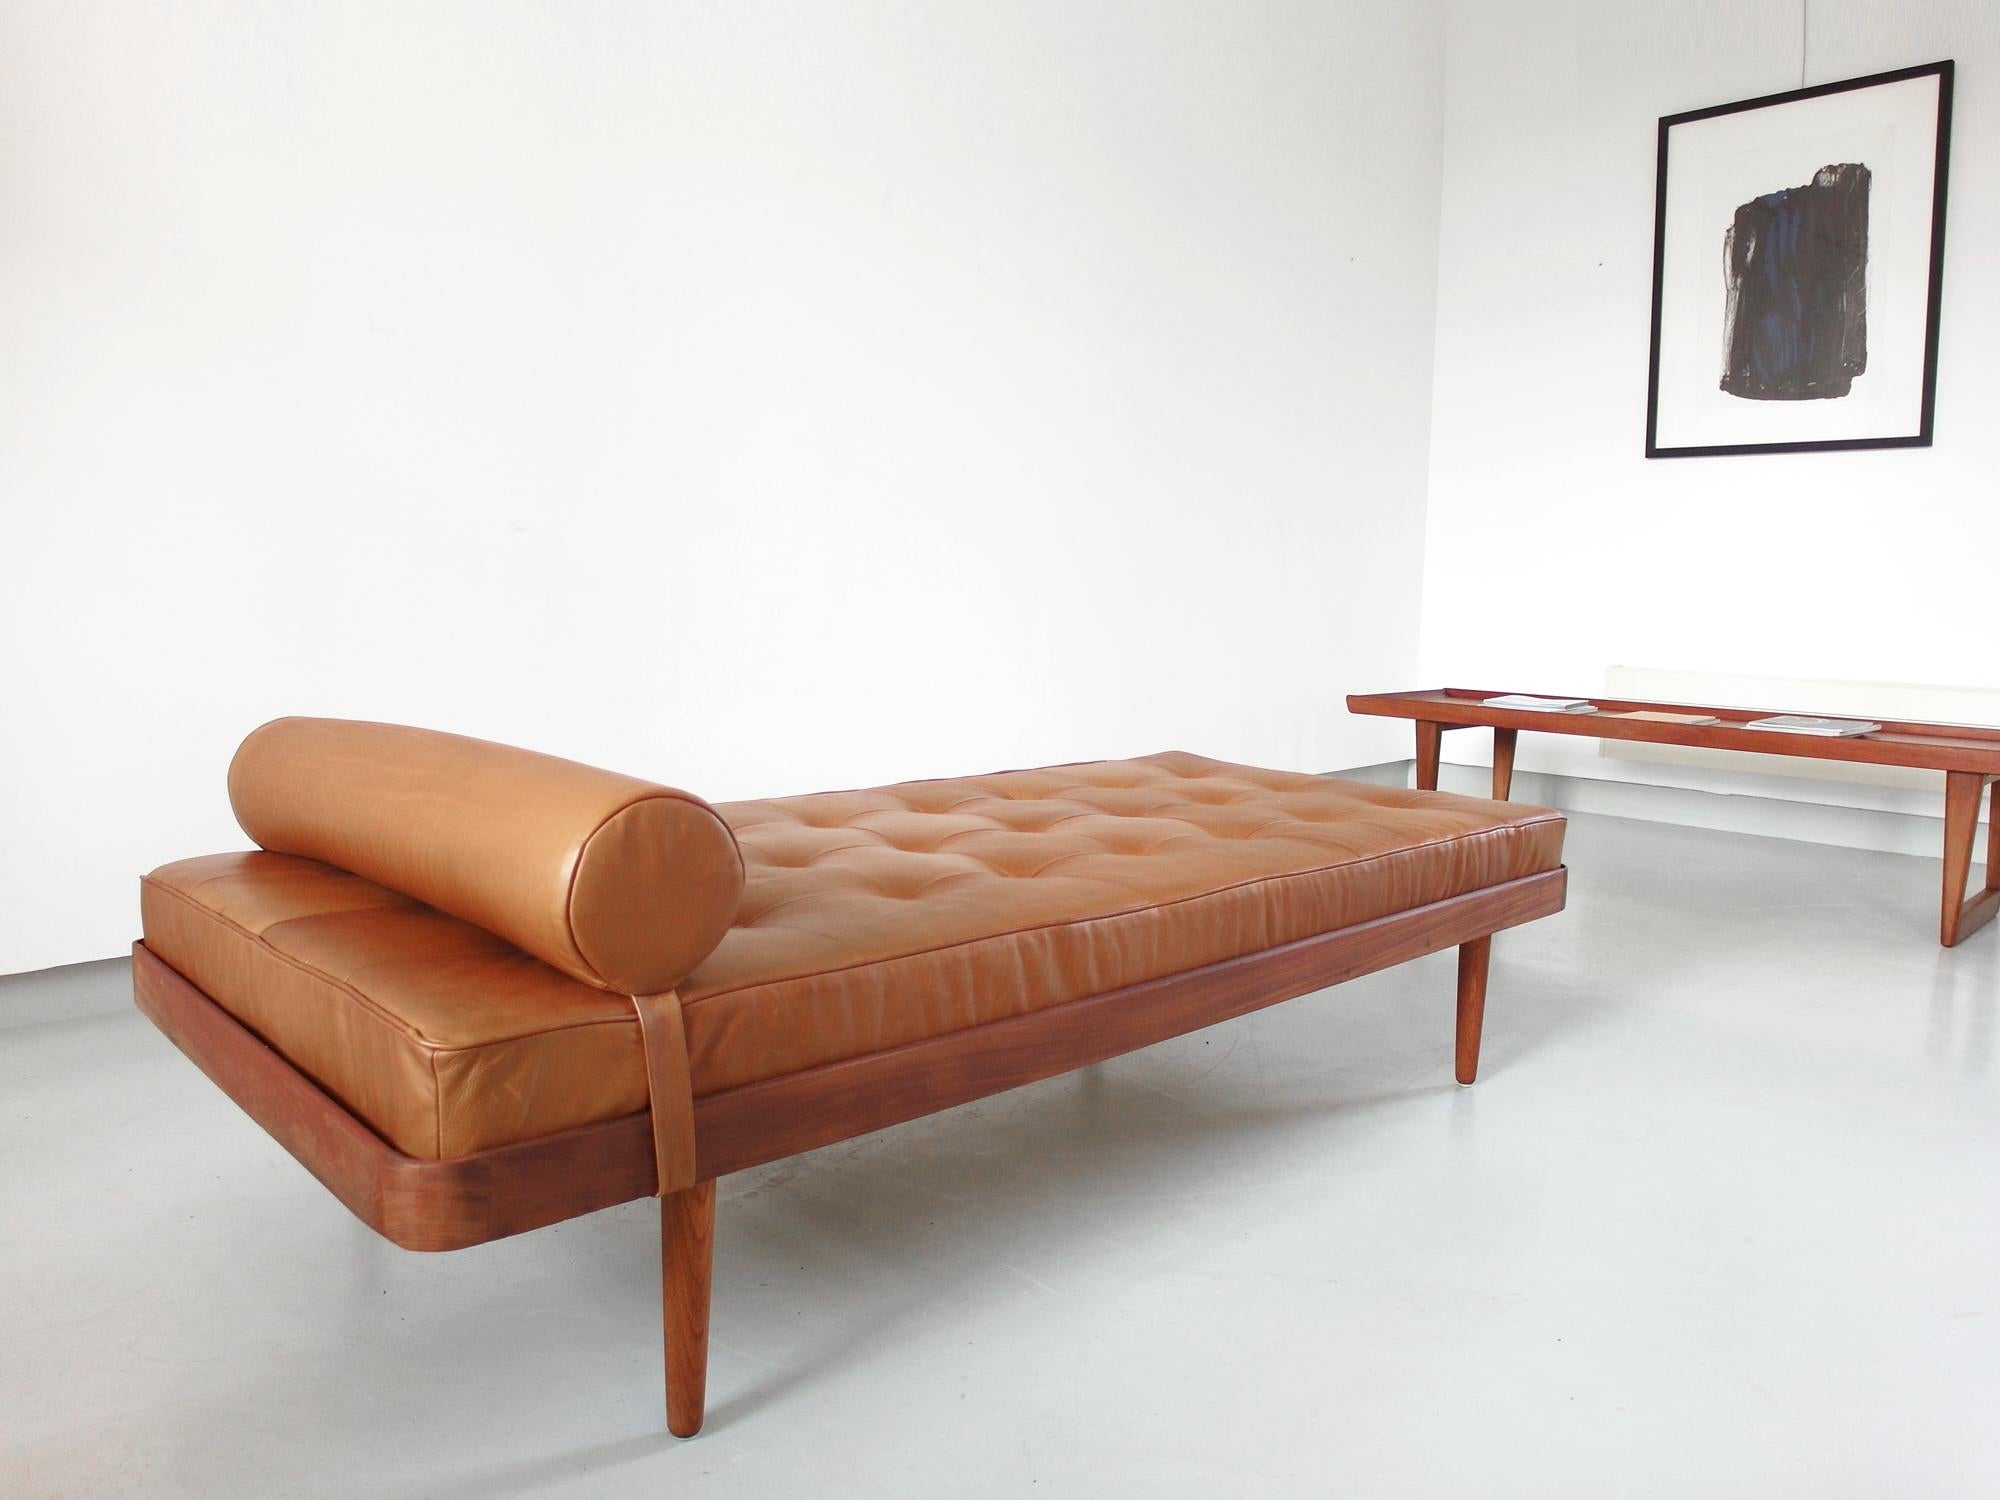 Mid-20th Century Solid Teak Danish Daybed with Cognac Aniline Leather Mattress Denmark circa 1956